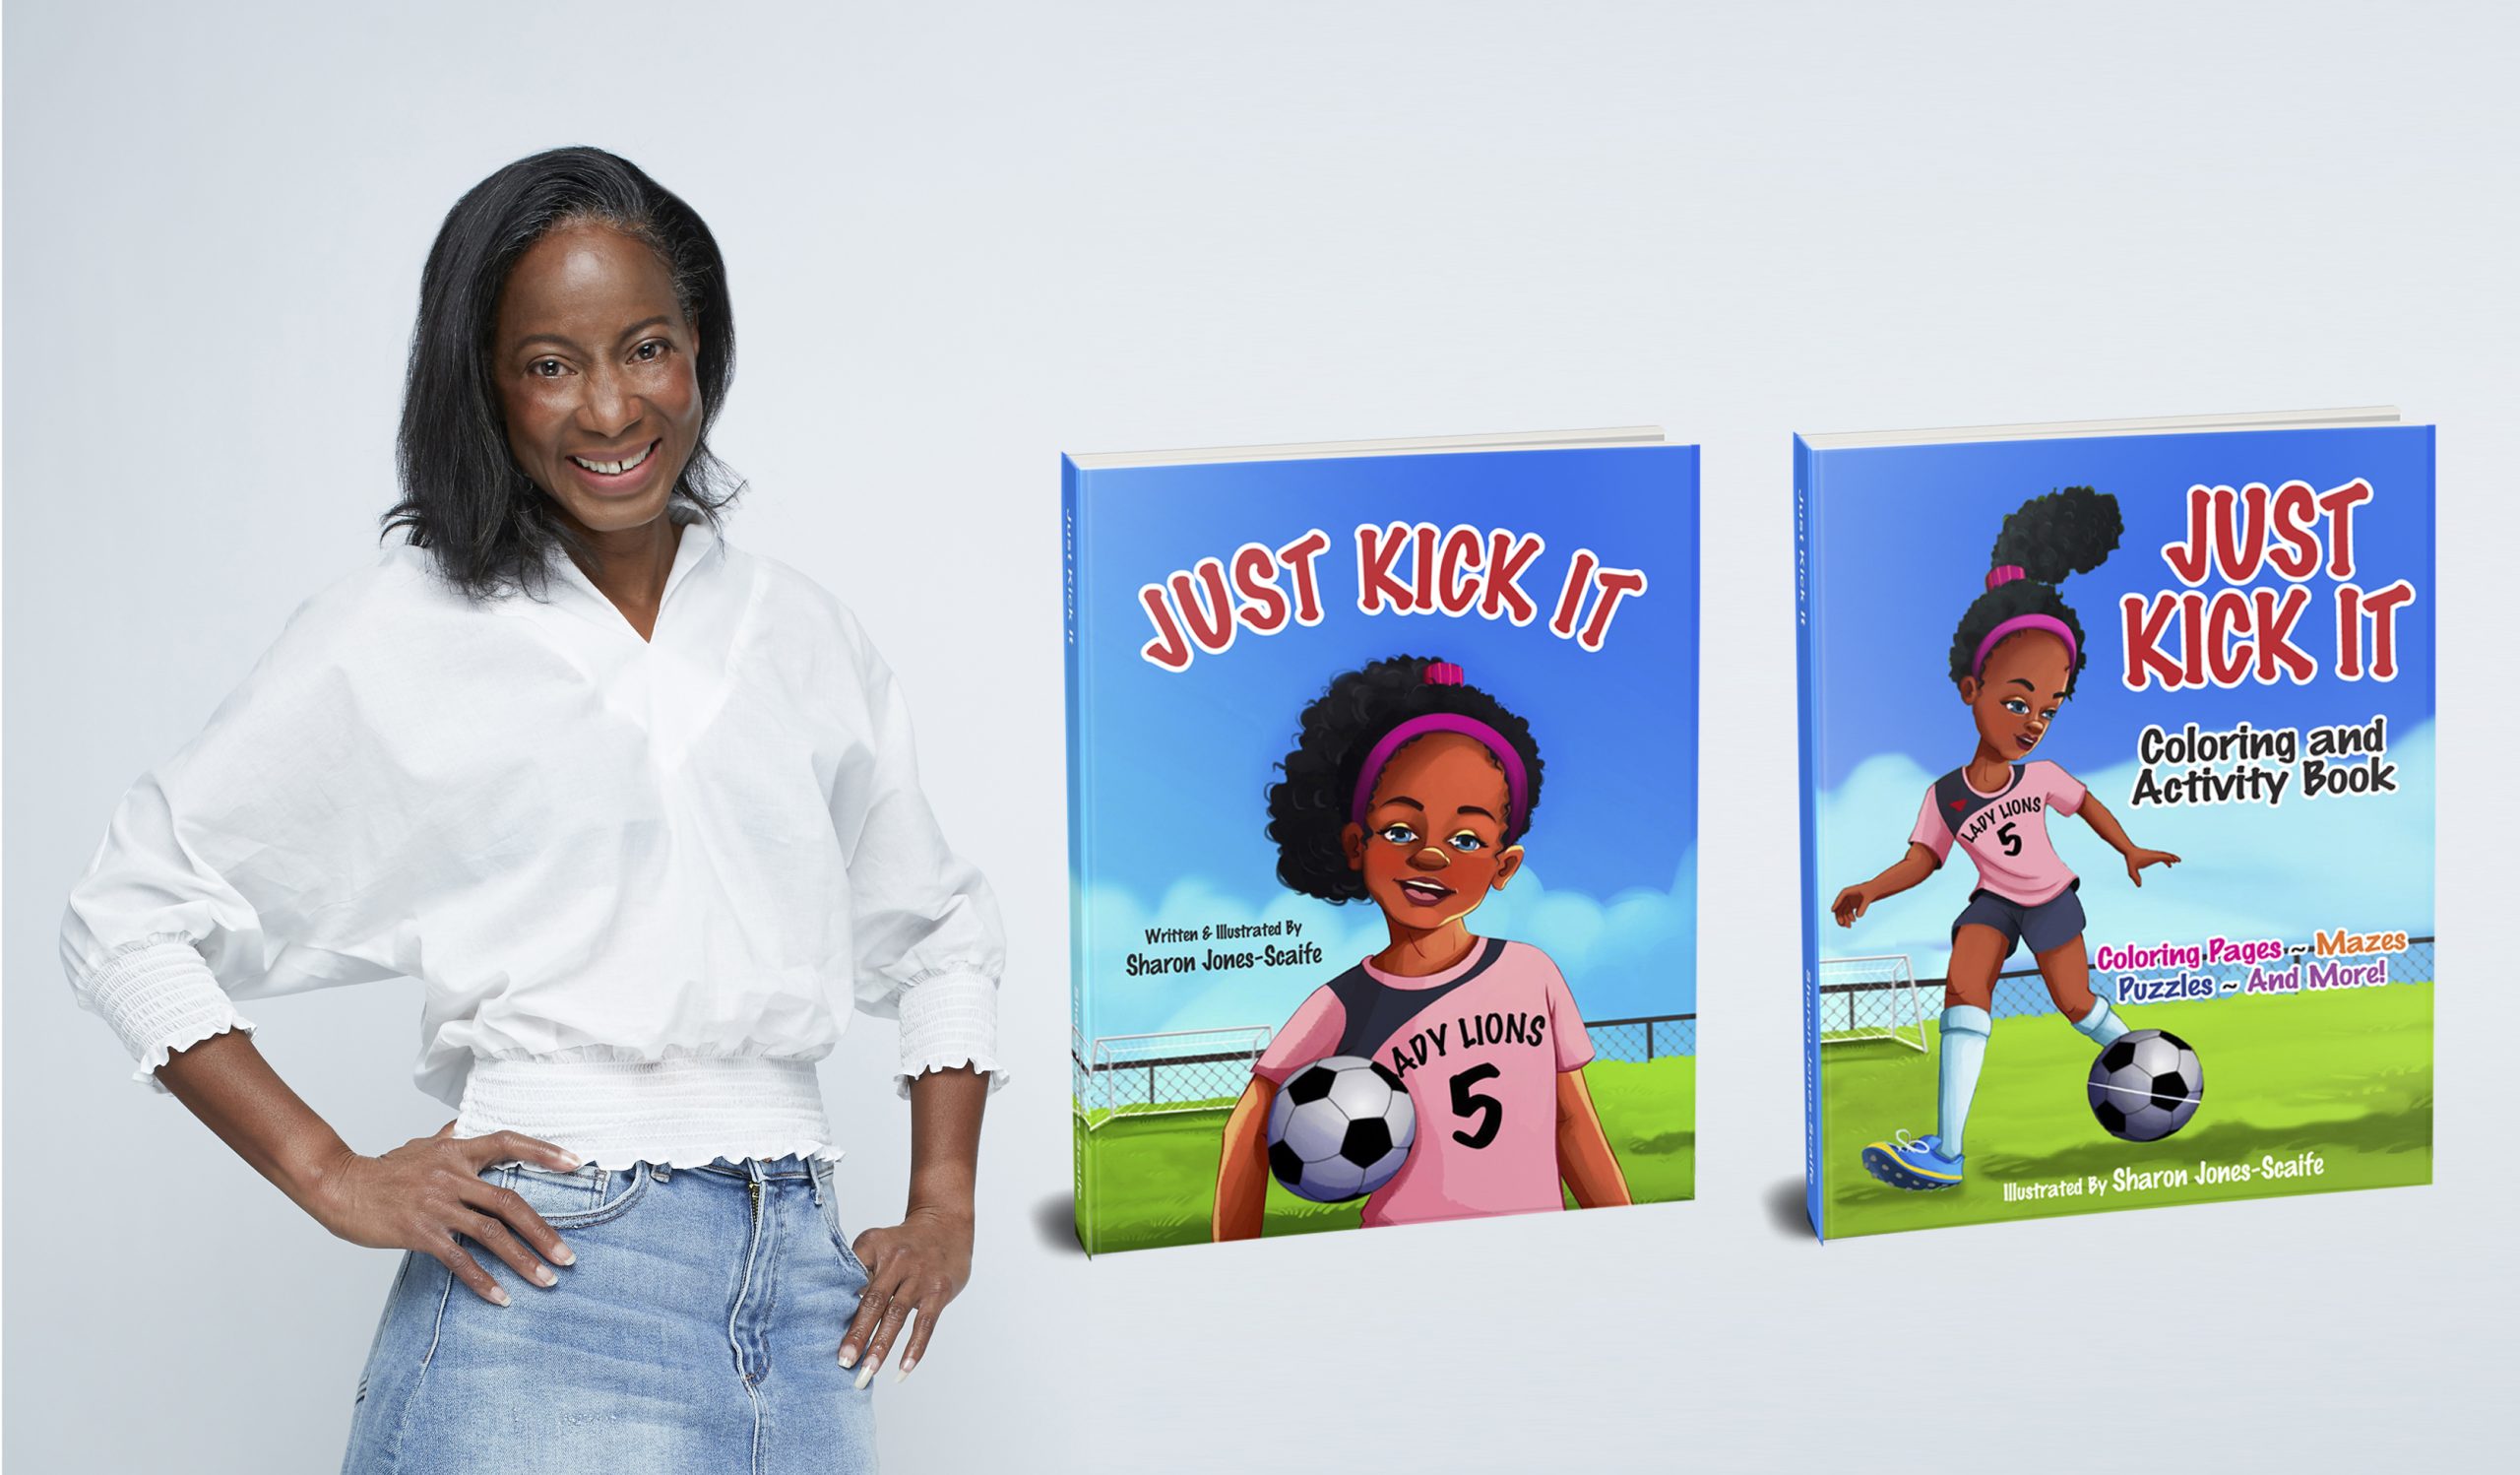 Frog Pond Publishing Announces the Release of “Just Kick It” a Children’s Book for Fans of Soccer and Courage!